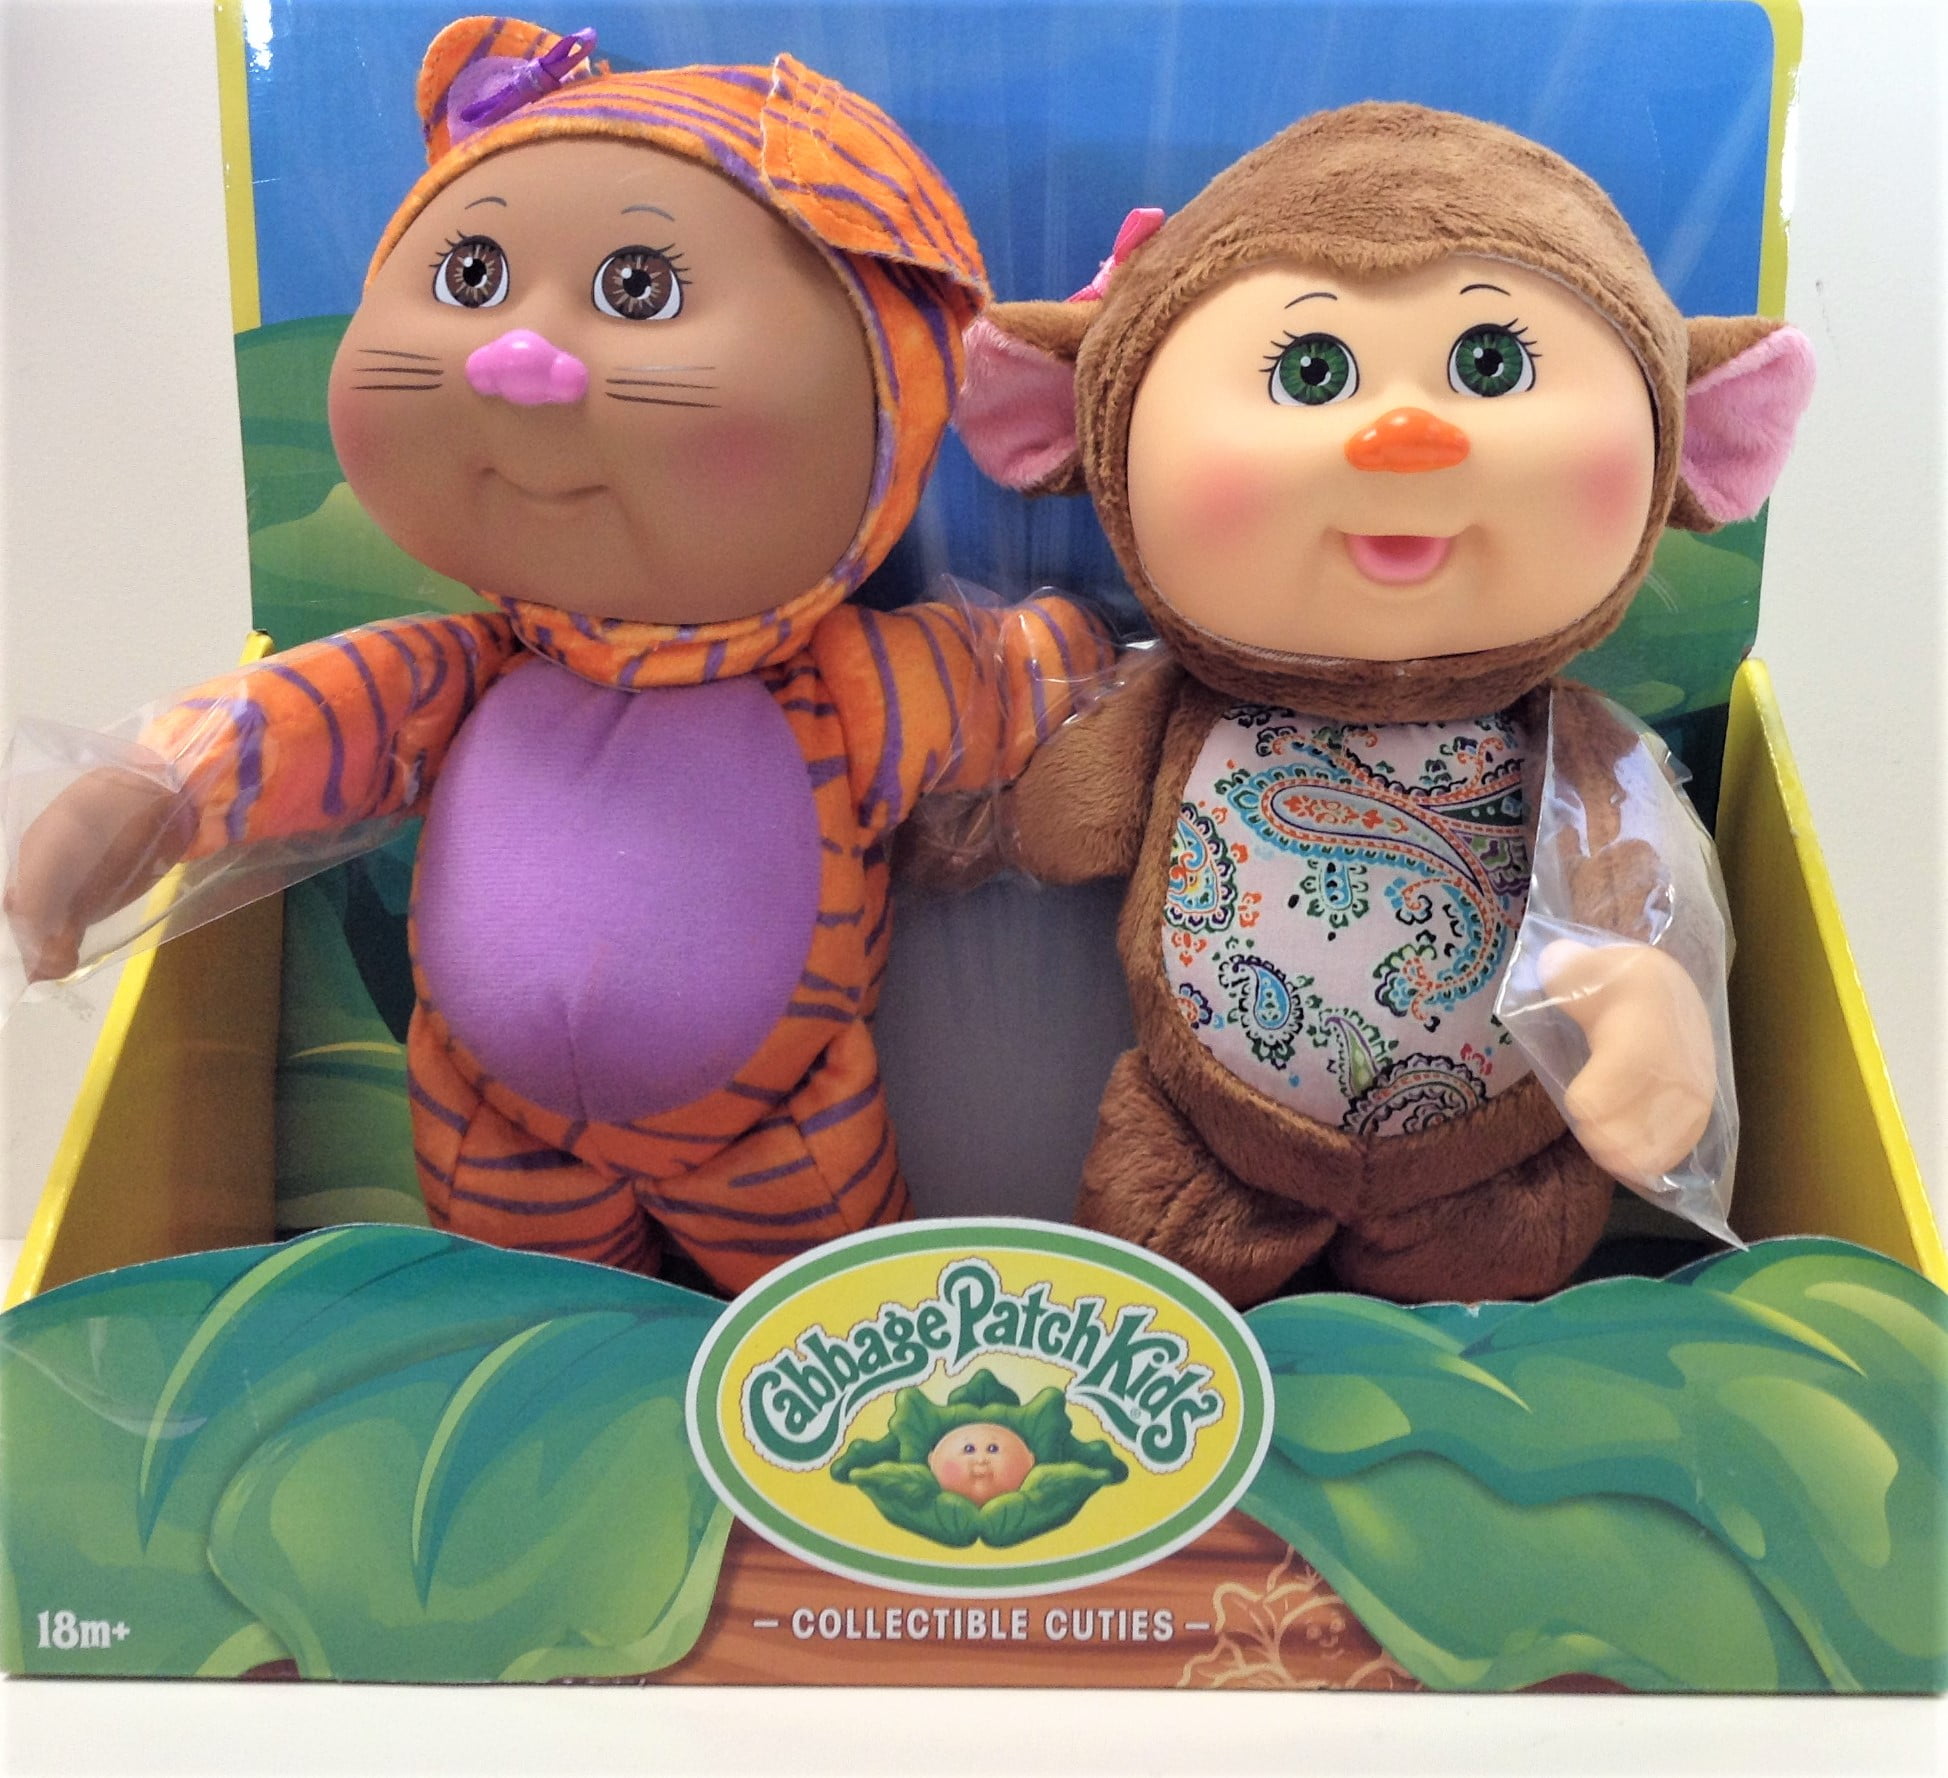 cabbage patch kid collectible